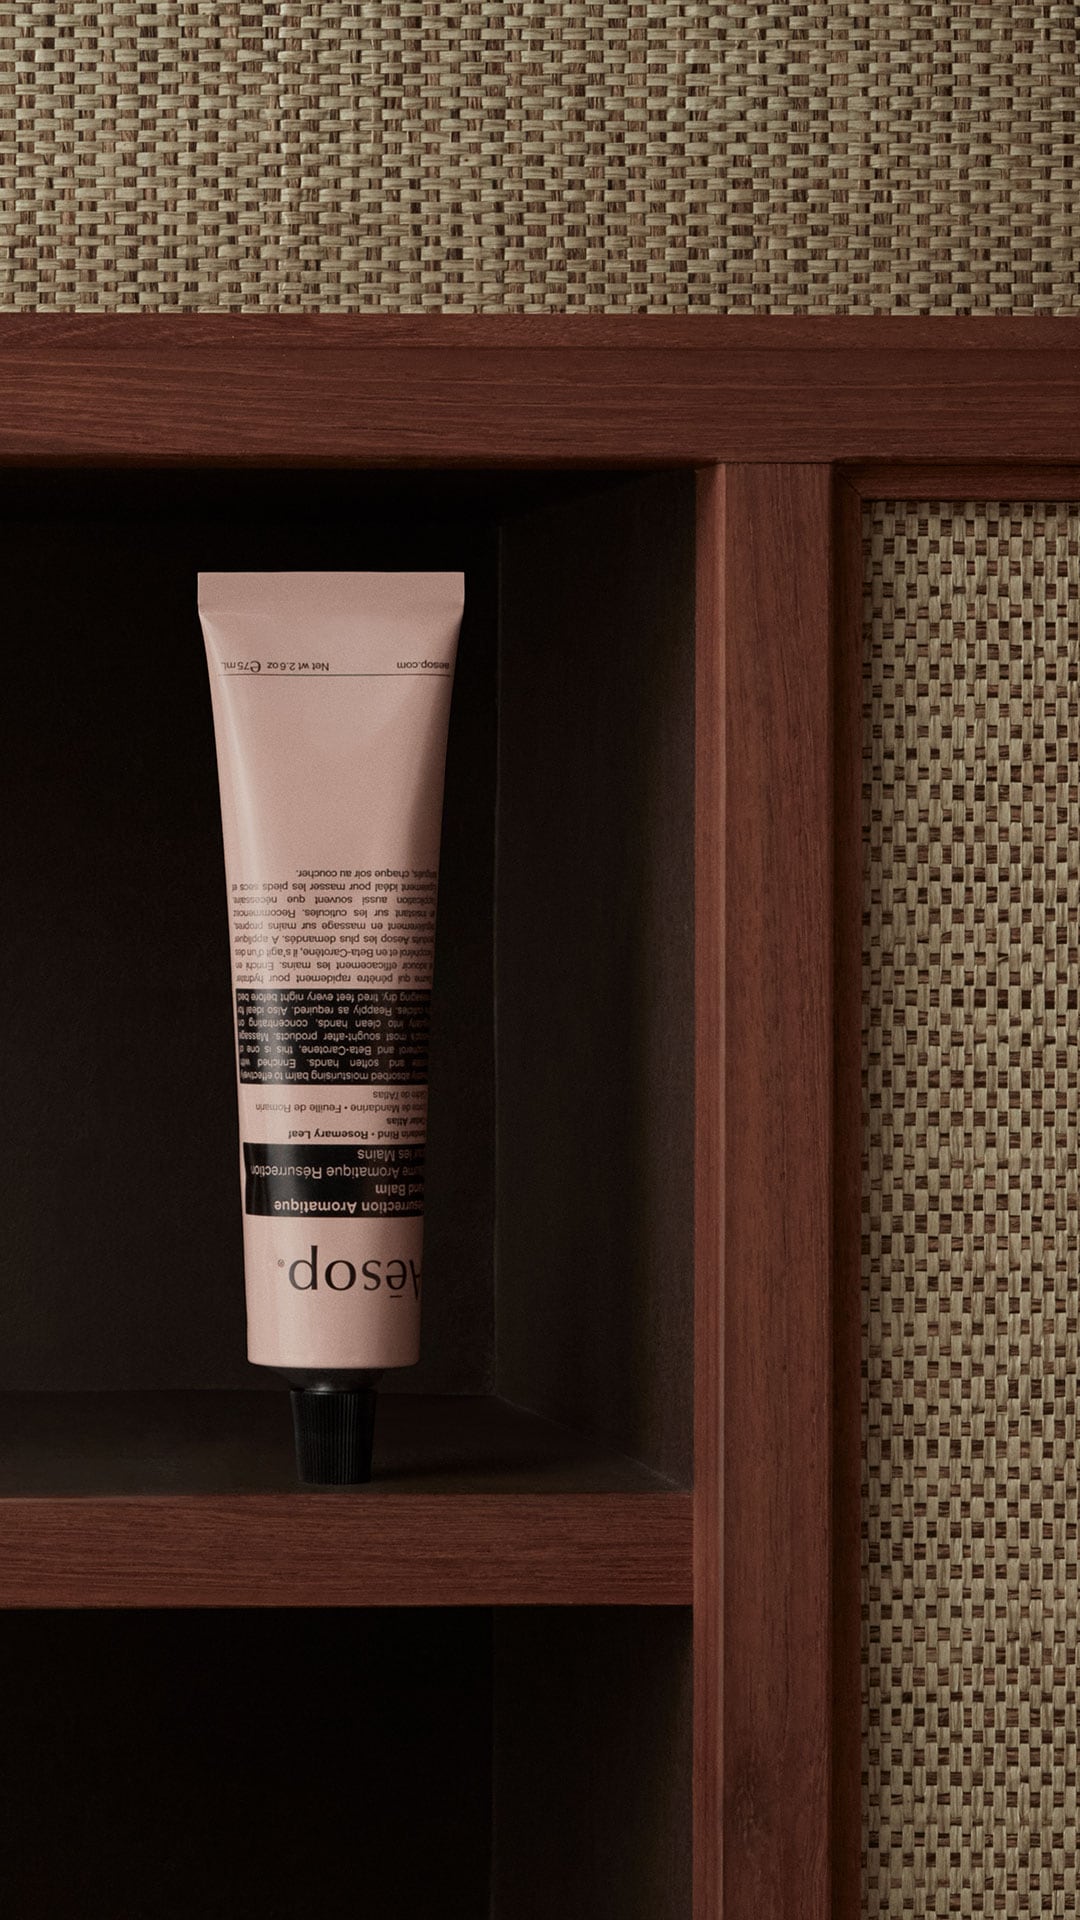 Resurrection hand balm in tube placed on a wooden shelf